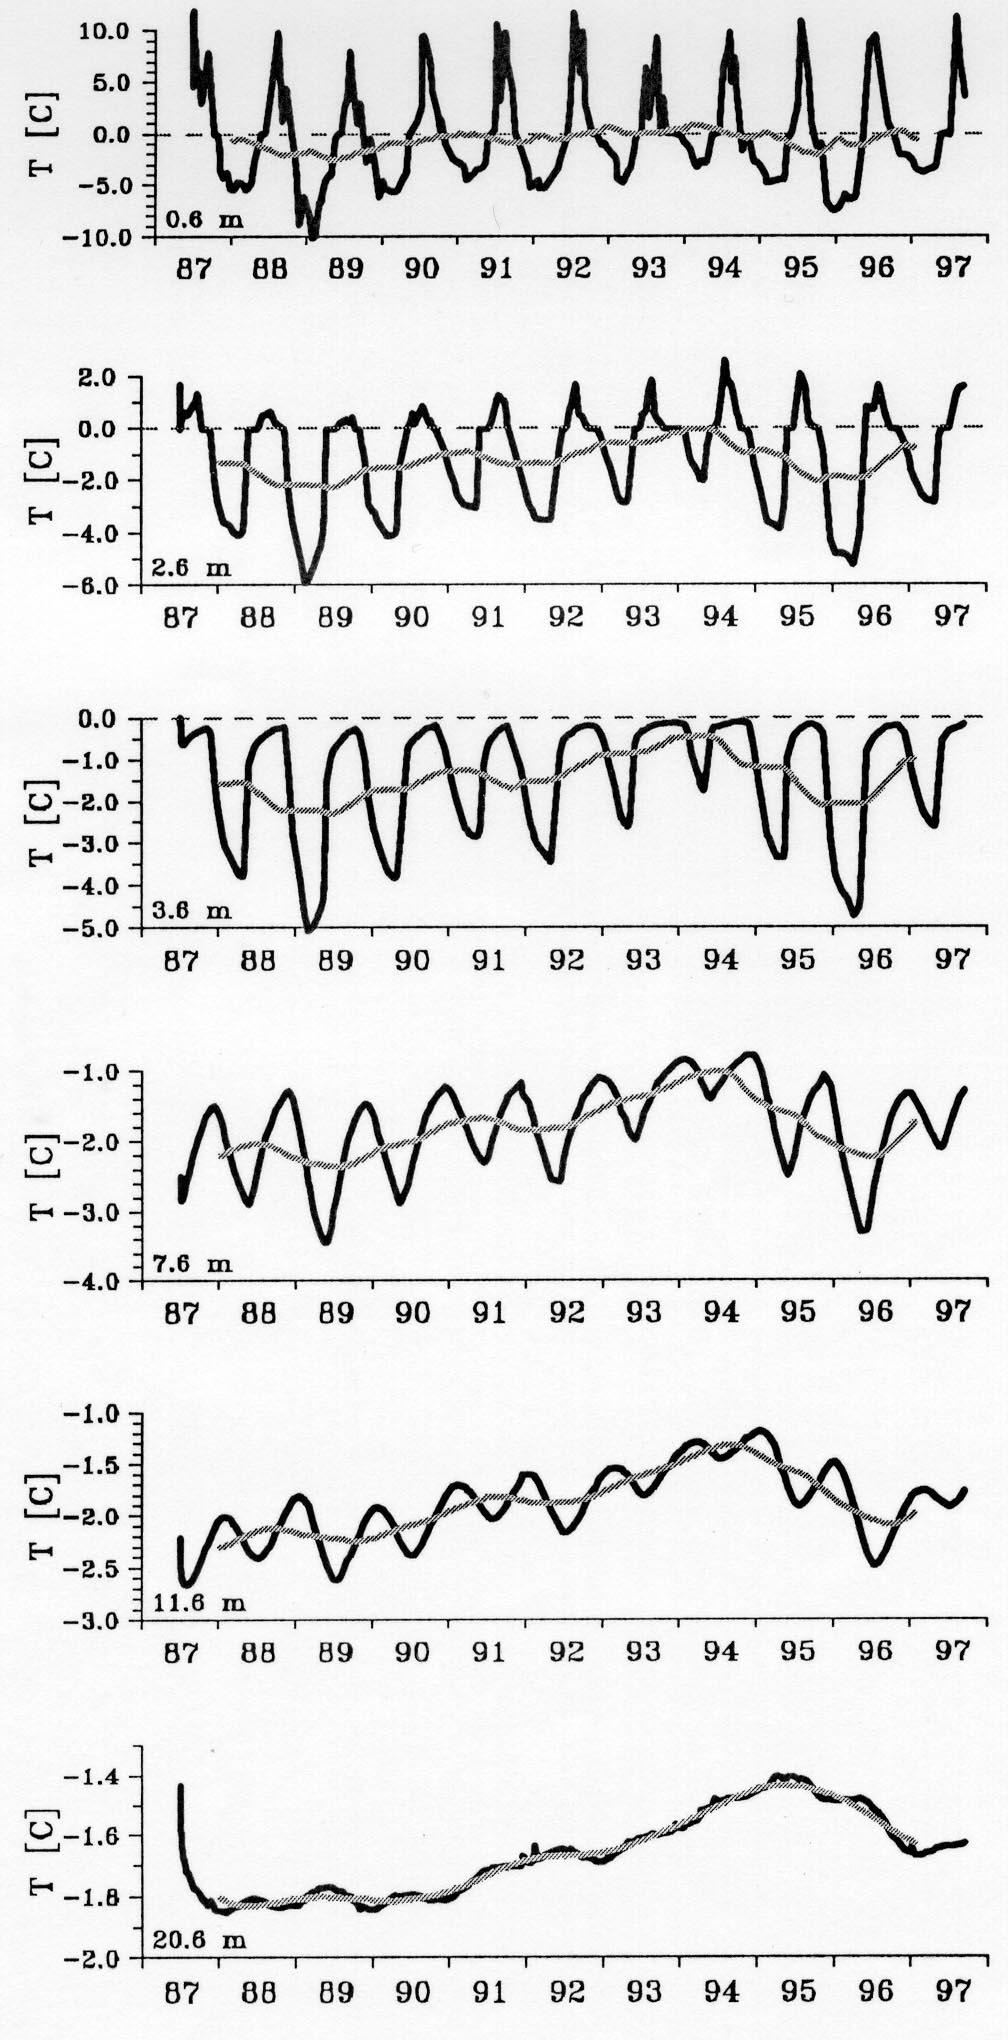 Intrapermafrost talik A special feature is observed at Murt l-corvatsch as described by Vonder MŸhll (1992): seasonal temperature variations occur not only down to a depth of roughly 20 m but also